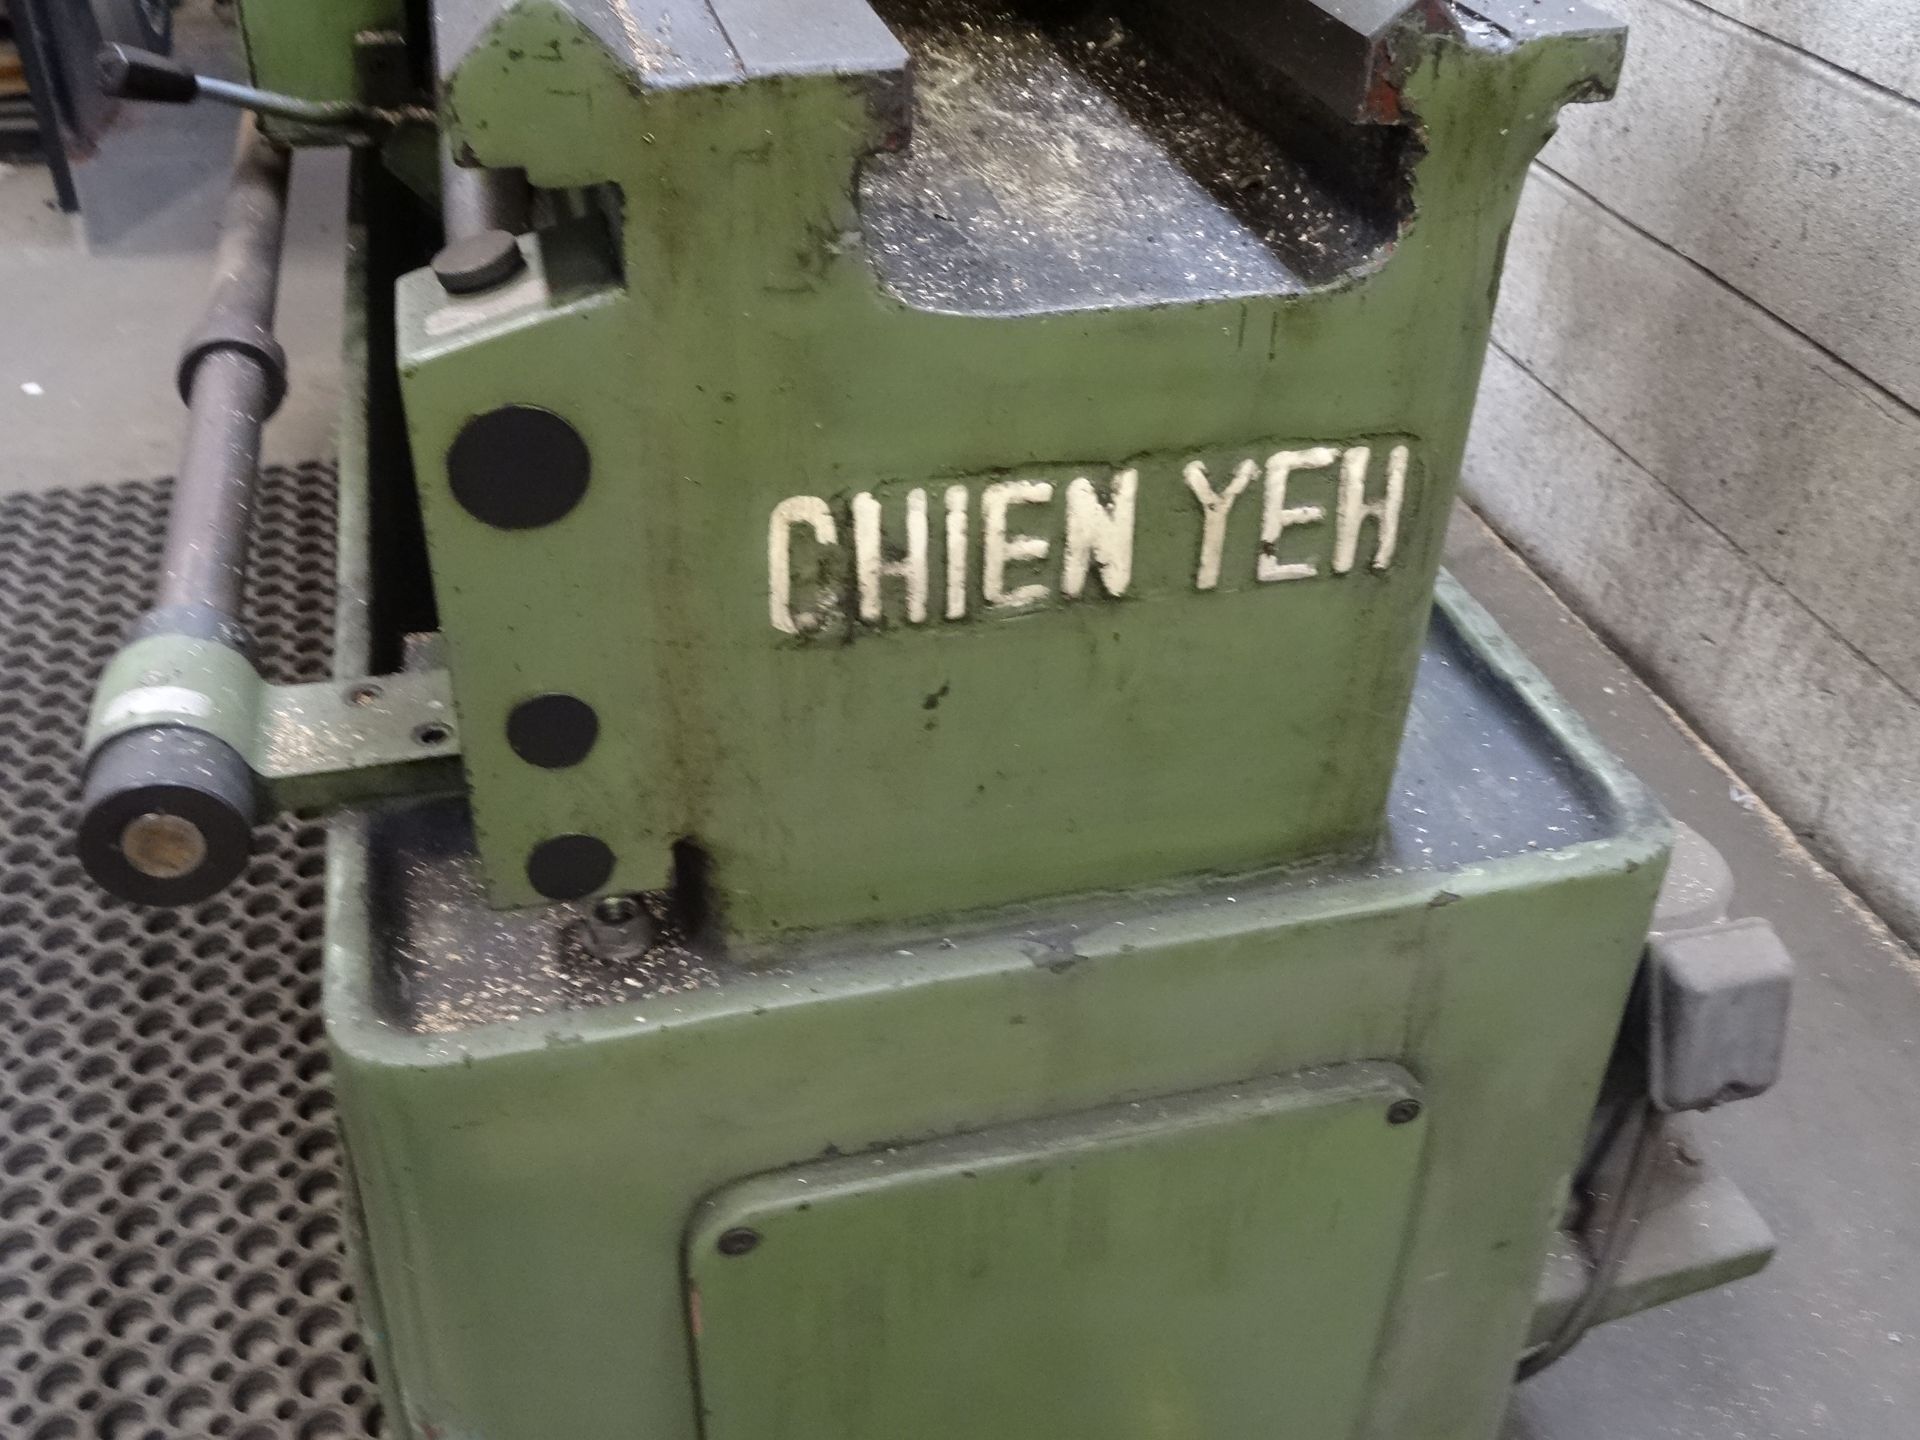 1X, CHIEN YEH, CY-380X800 LATHE (SEE SPECIAL NOTE) - Image 4 of 7